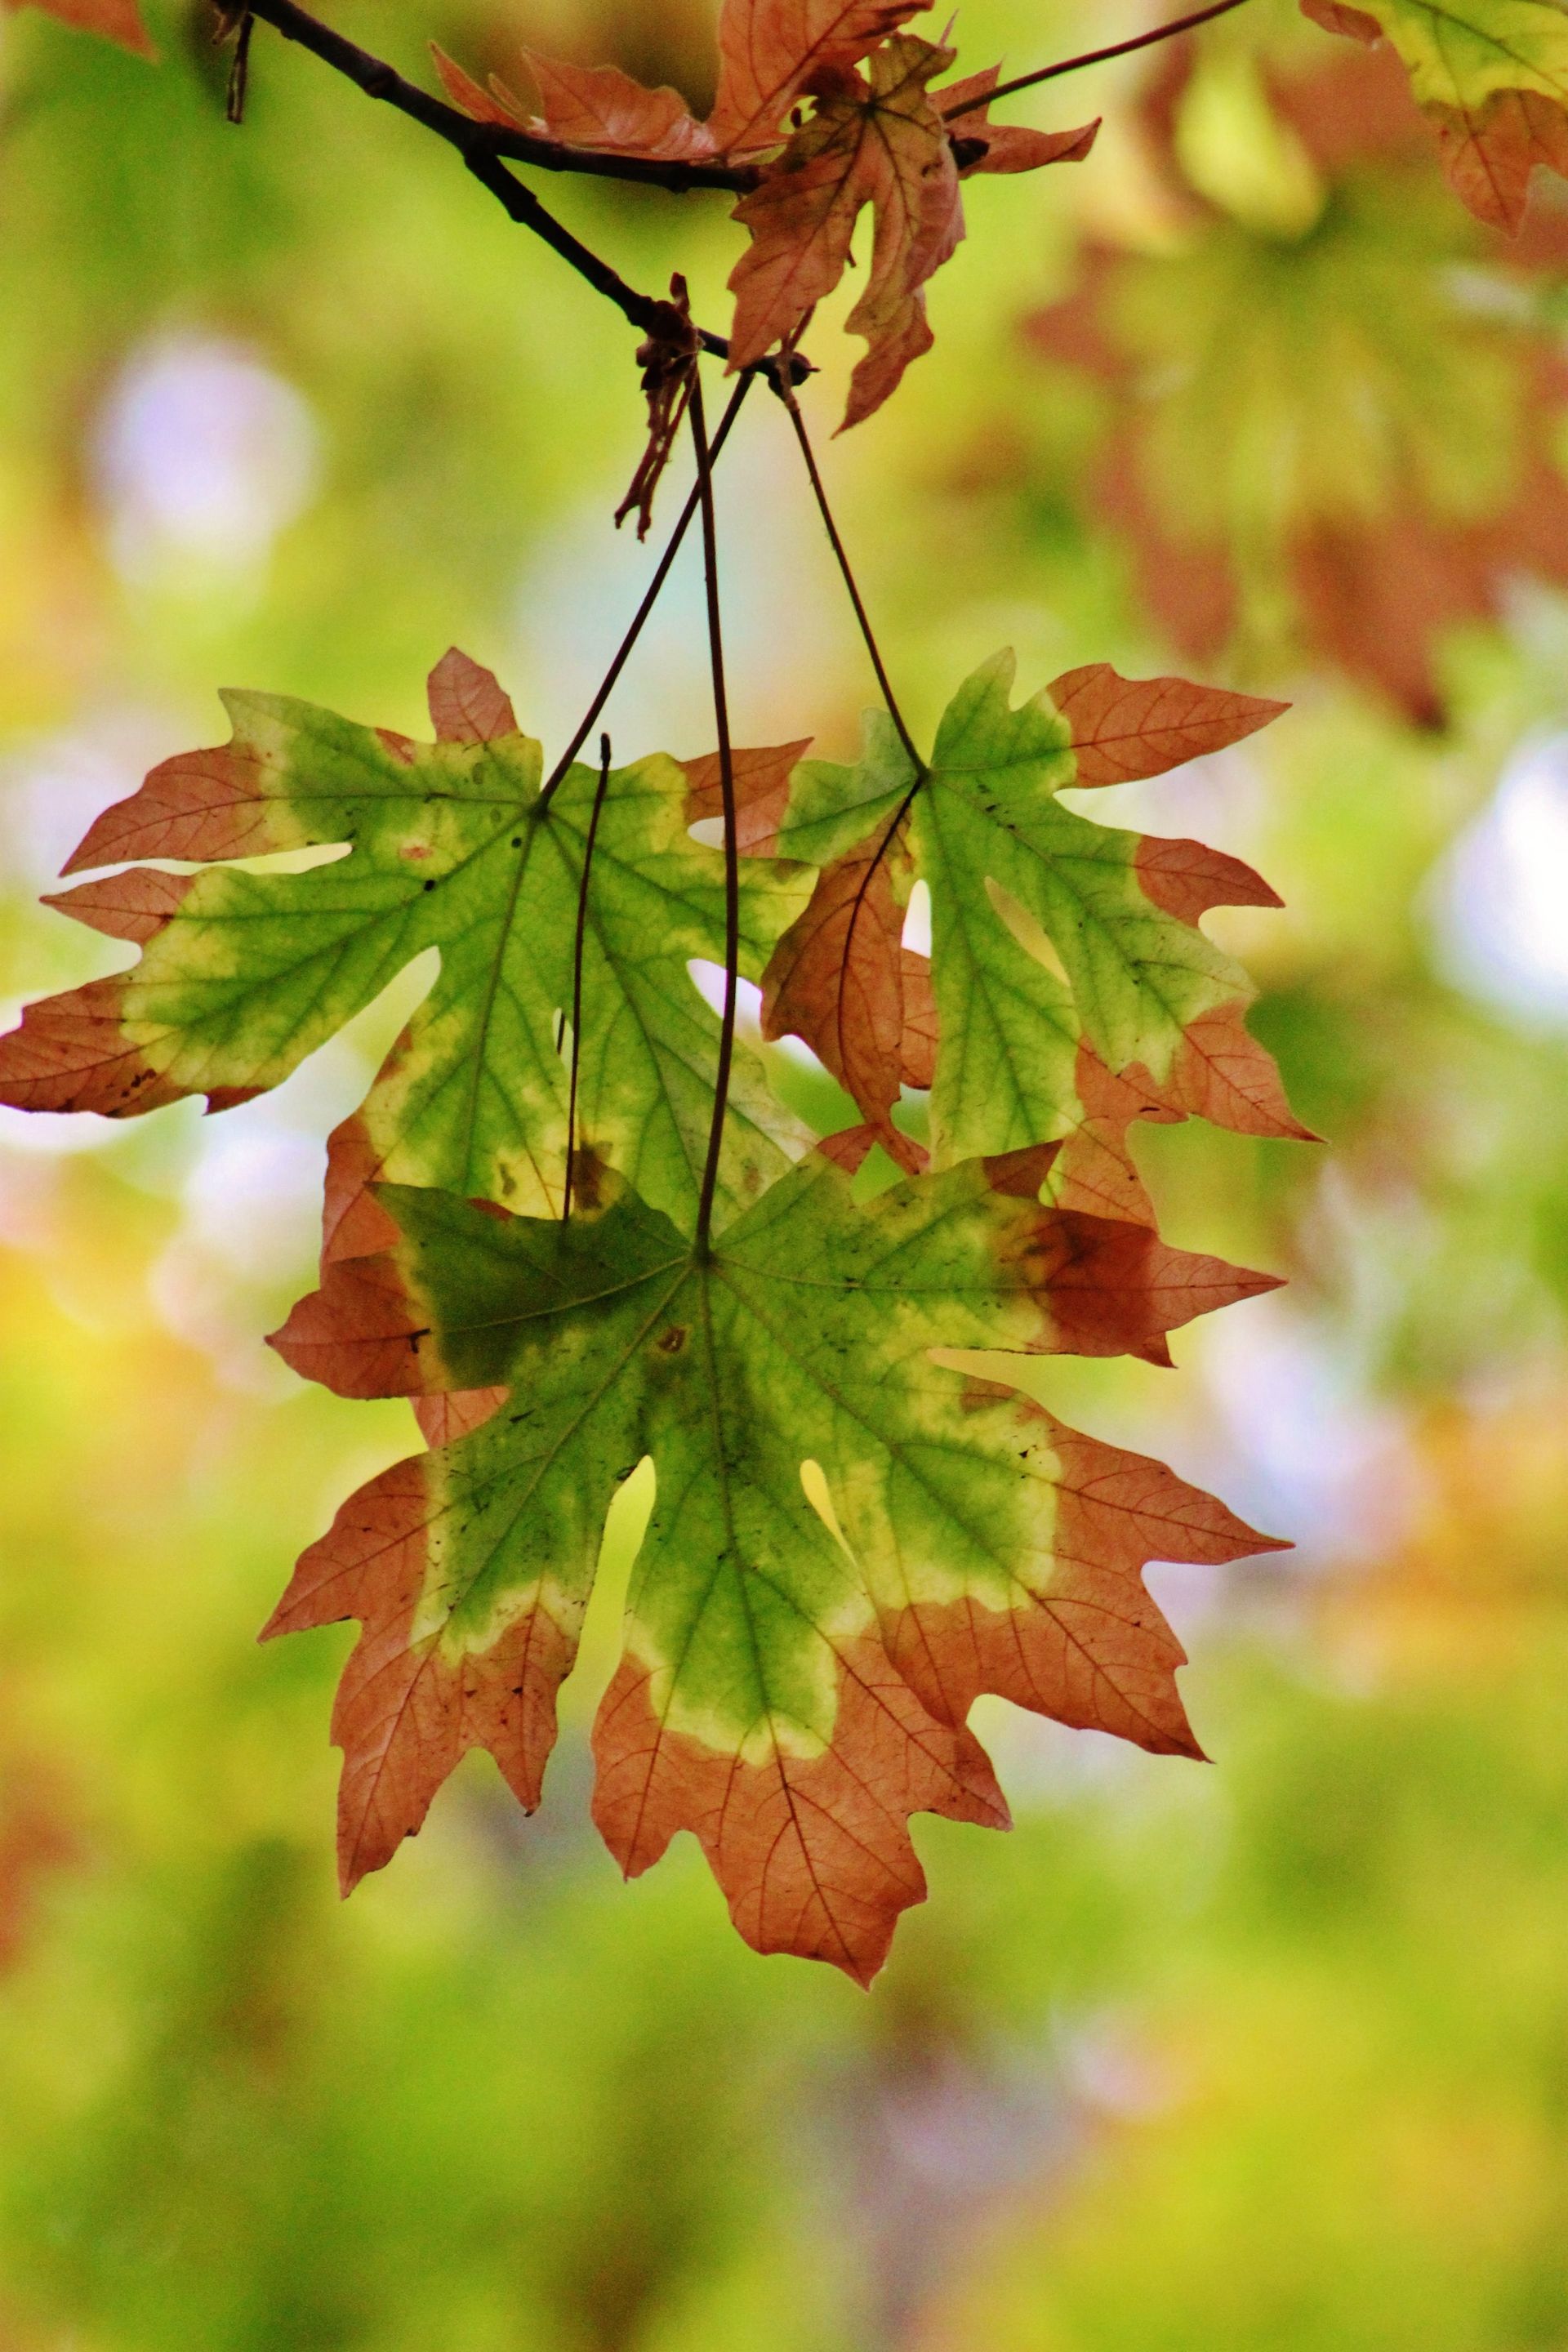 A small branch of leaves changing colors in the fall season.